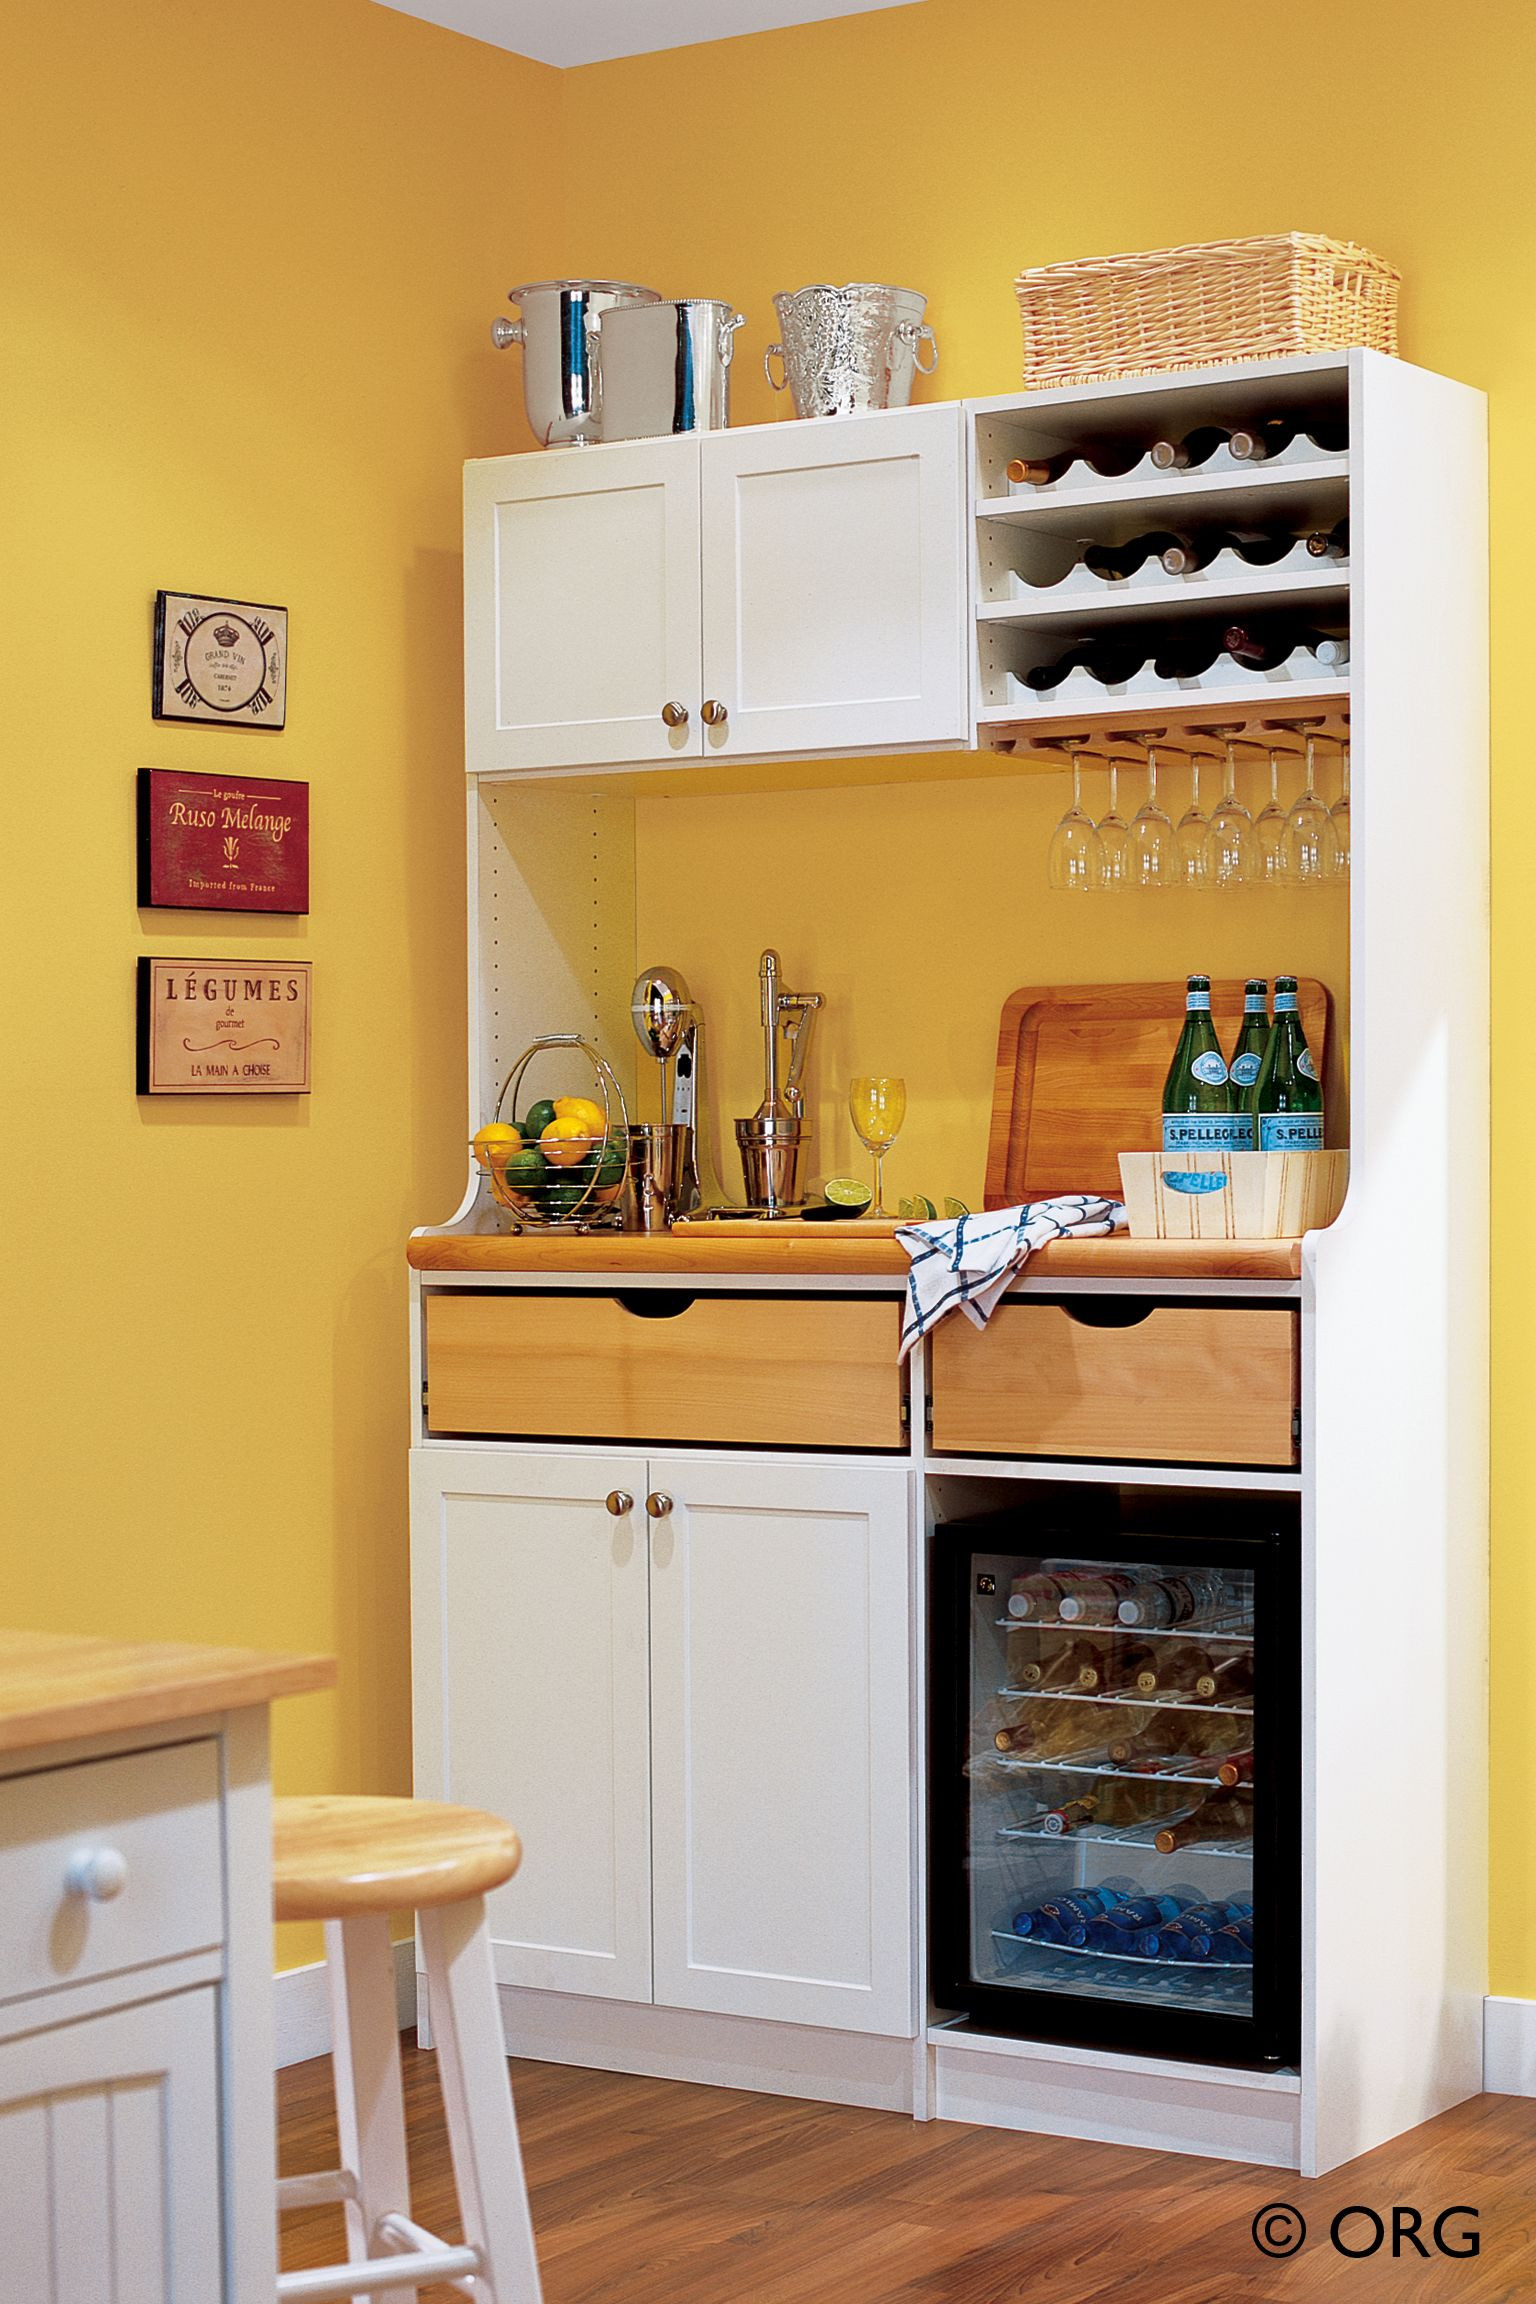 Storage Solutions For Small Kitchen
 storage solutions for tiny kitchens